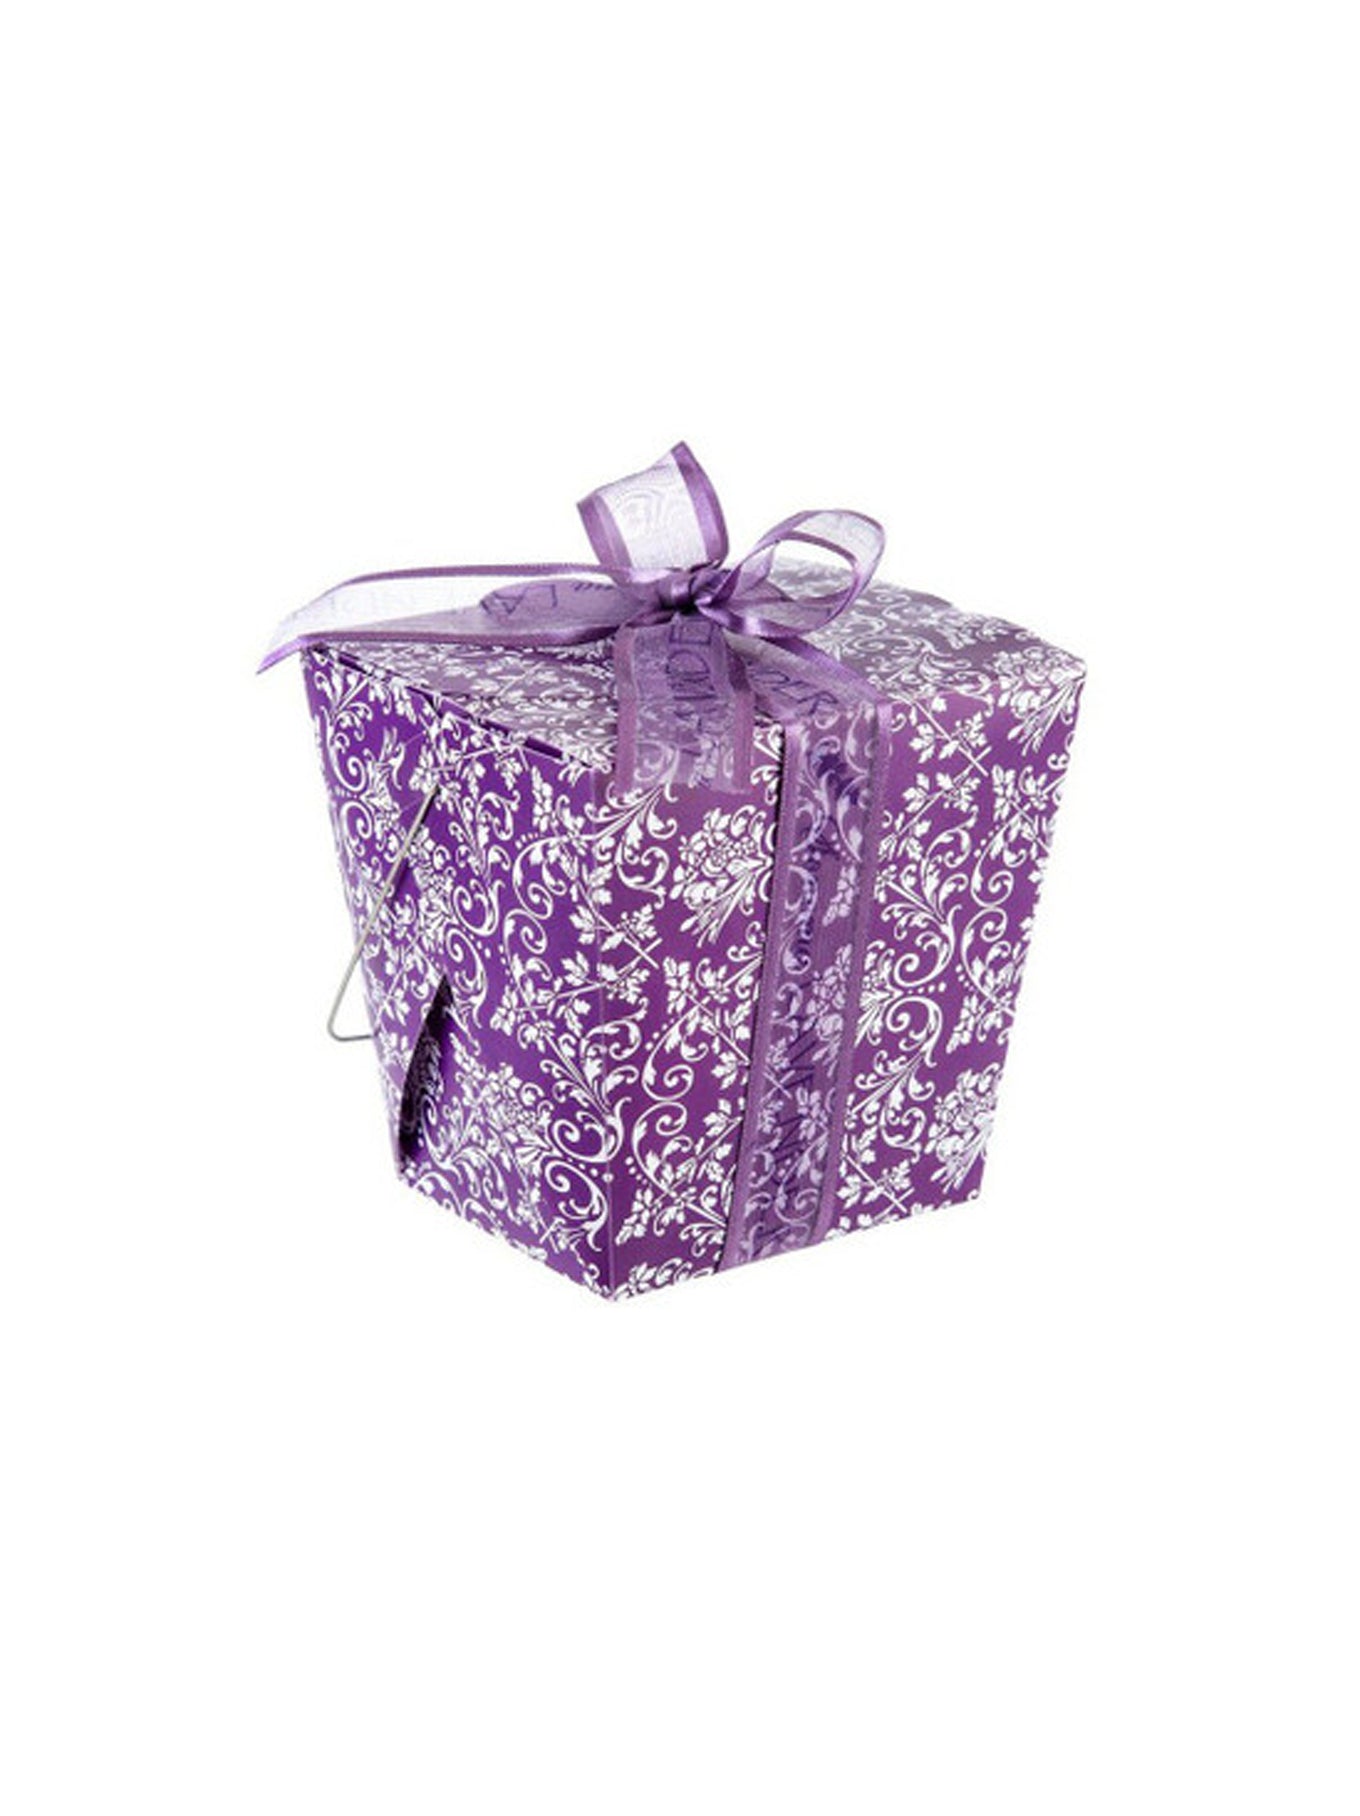 Take-Out Gift Box of 4 Lavender Treats C148031